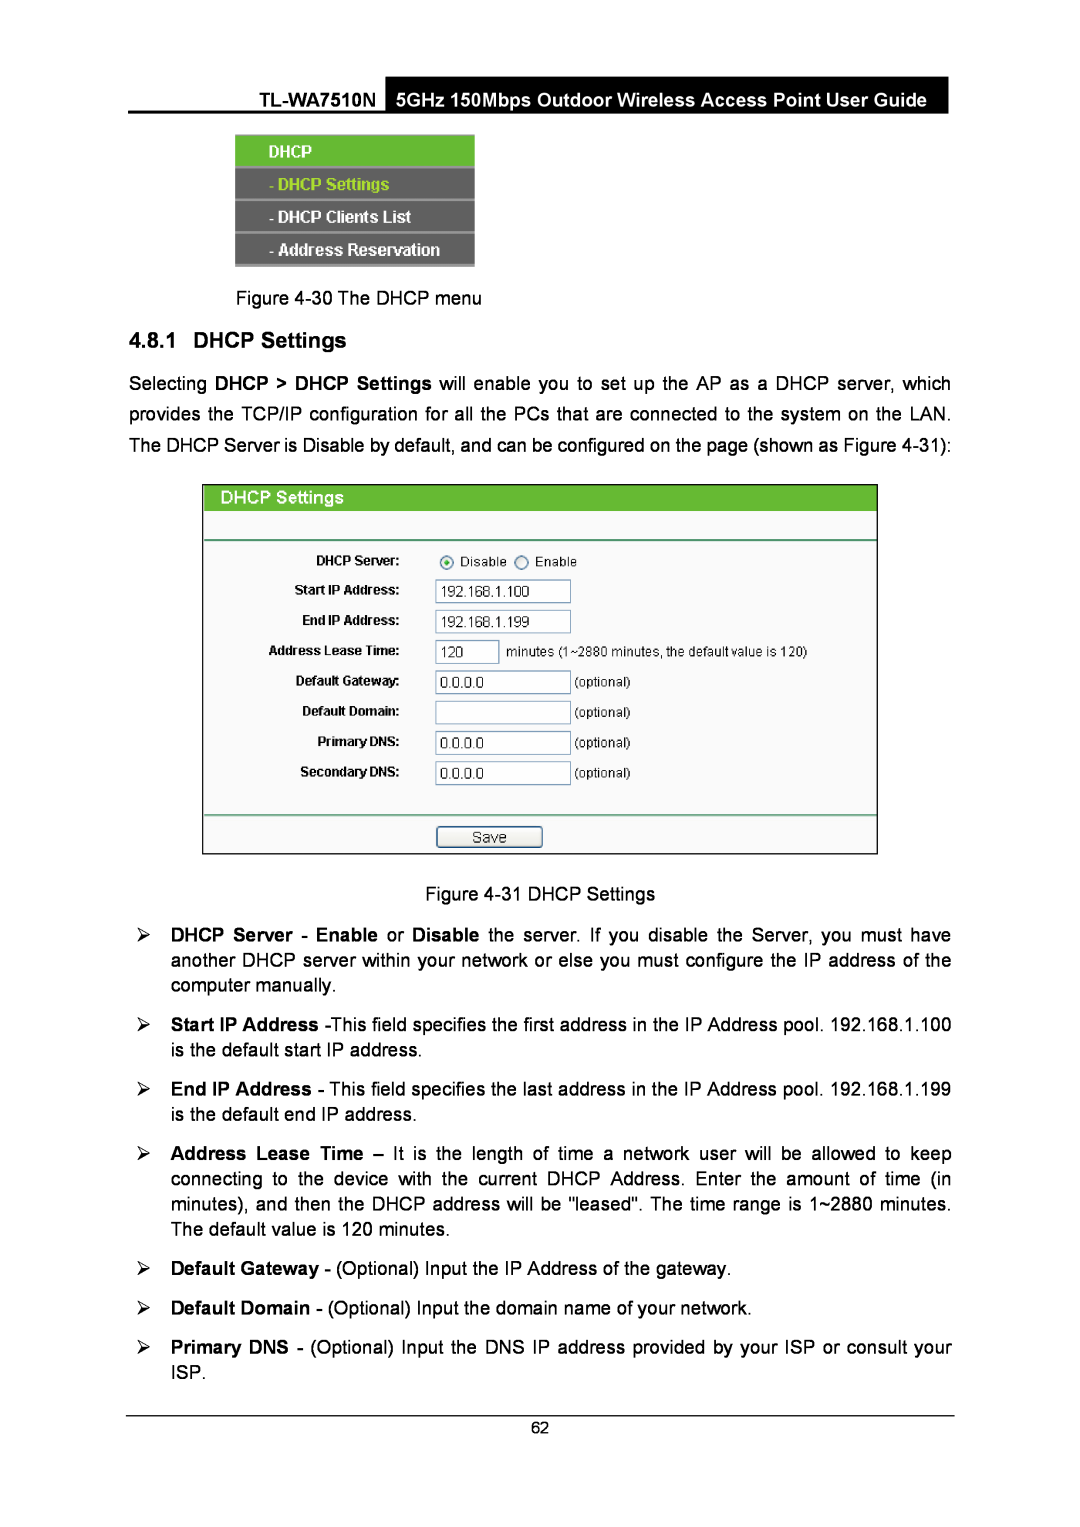 TP-Link manual DHCP Settings, TL-WA7510N 5GHz 150Mbps Outdoor Wireless Access Point User Guide 